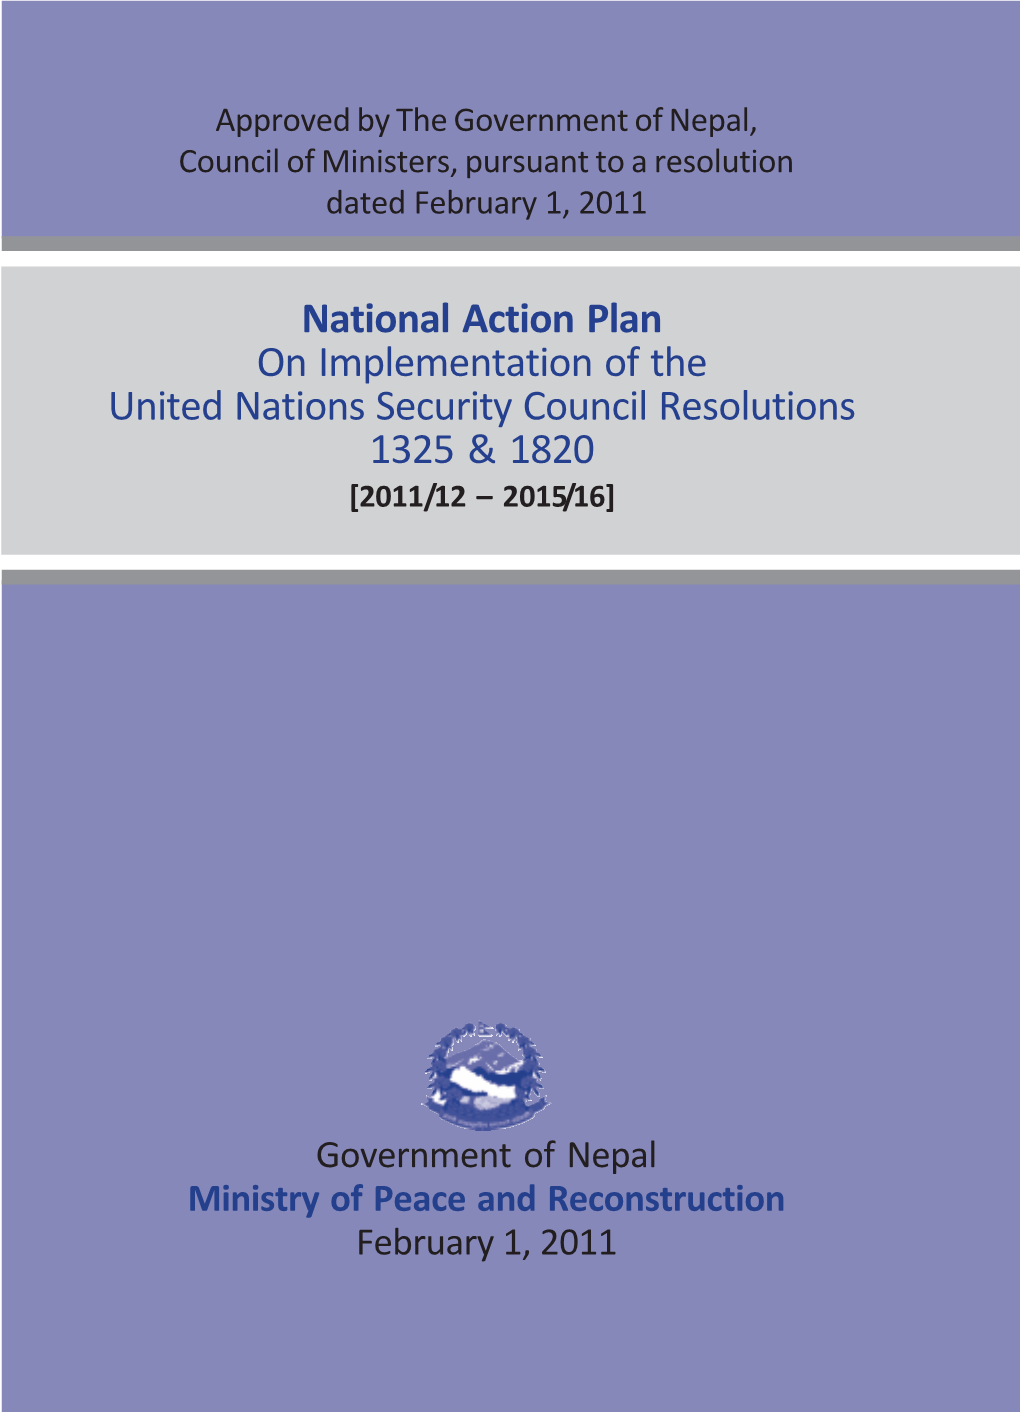 National Action Plan on Implementation of the United Nations Security Council Resolutions 1325 & 1820 [2011/12 – 2015/16]